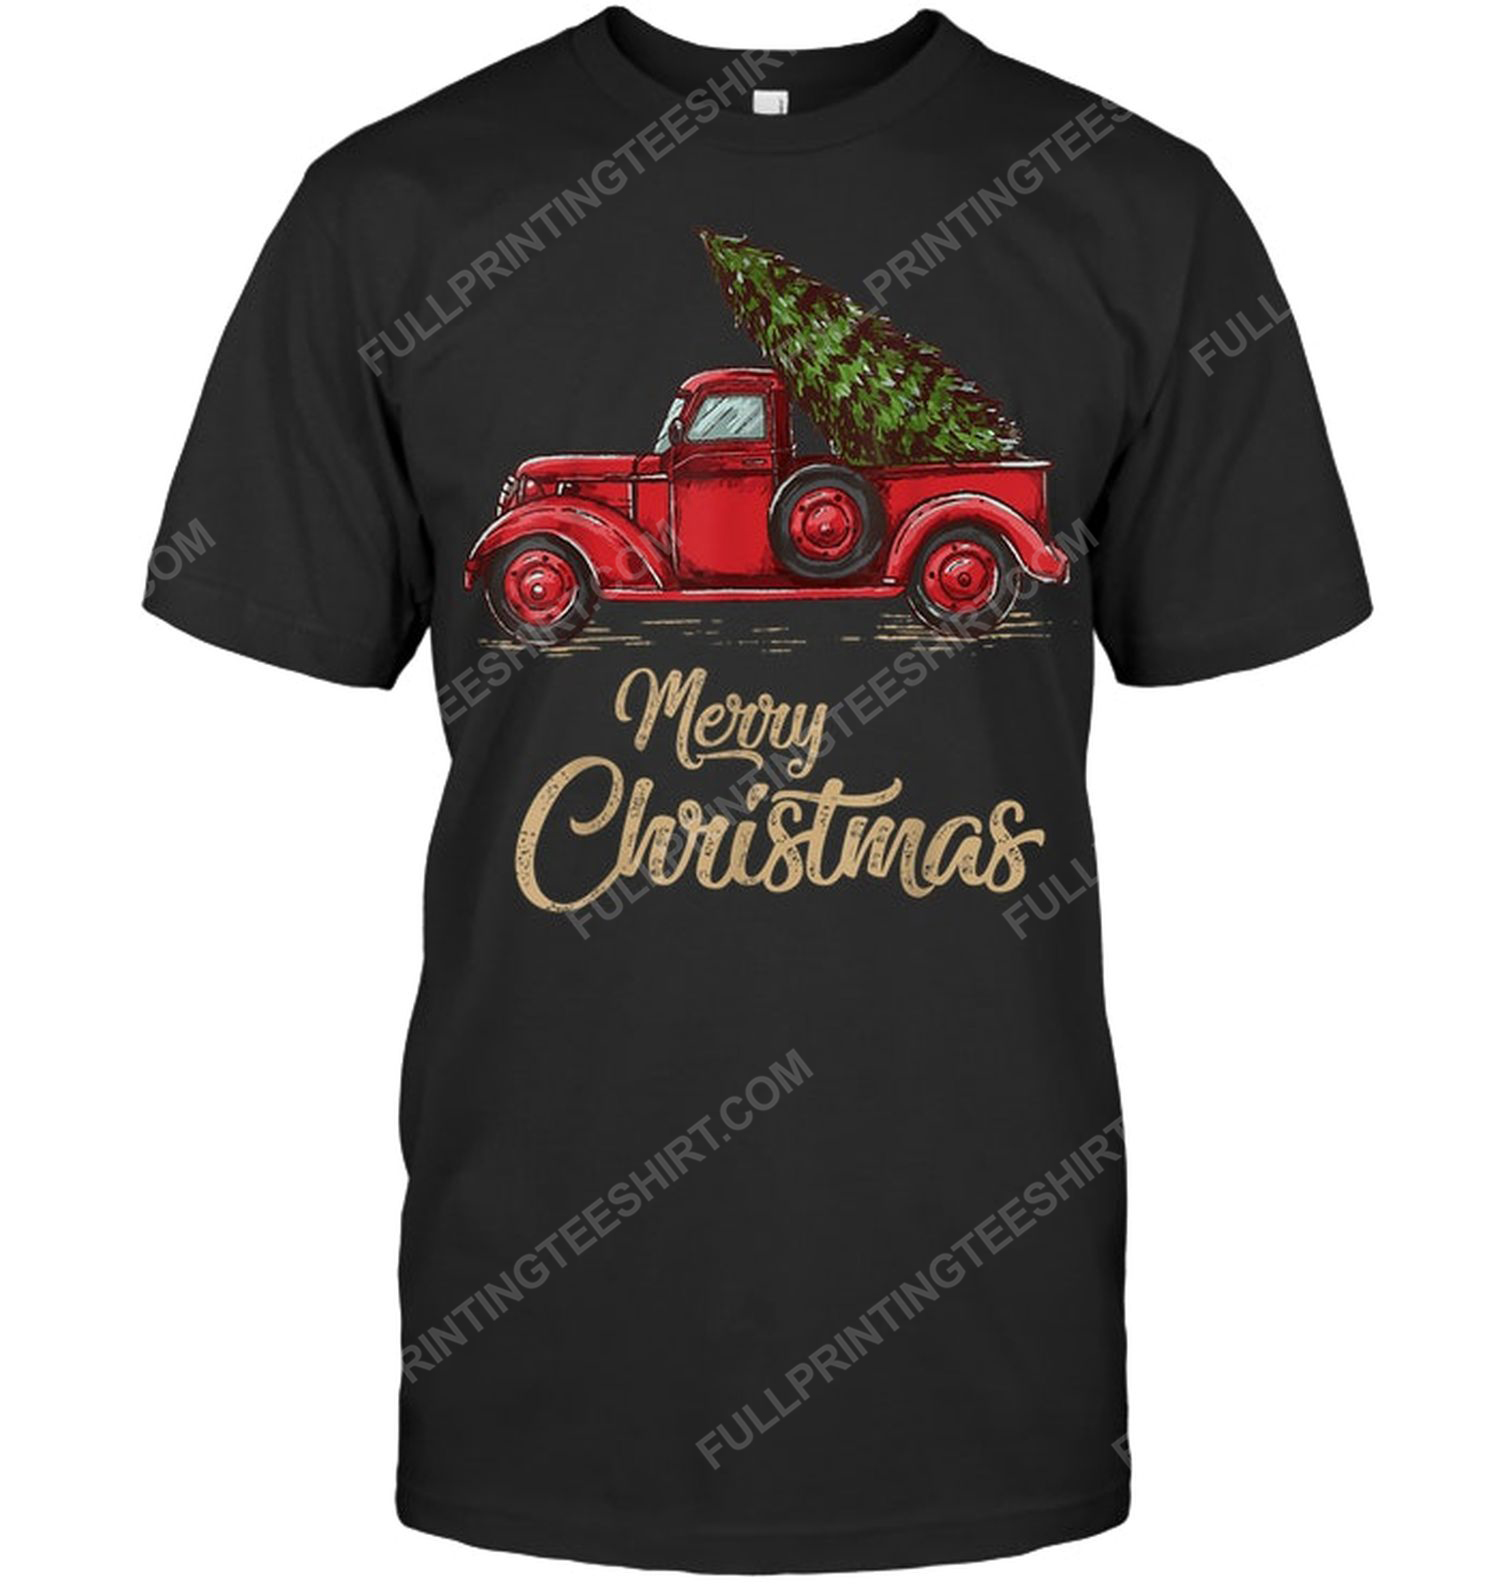 Vintage red truck with merry christmas tree tshirt